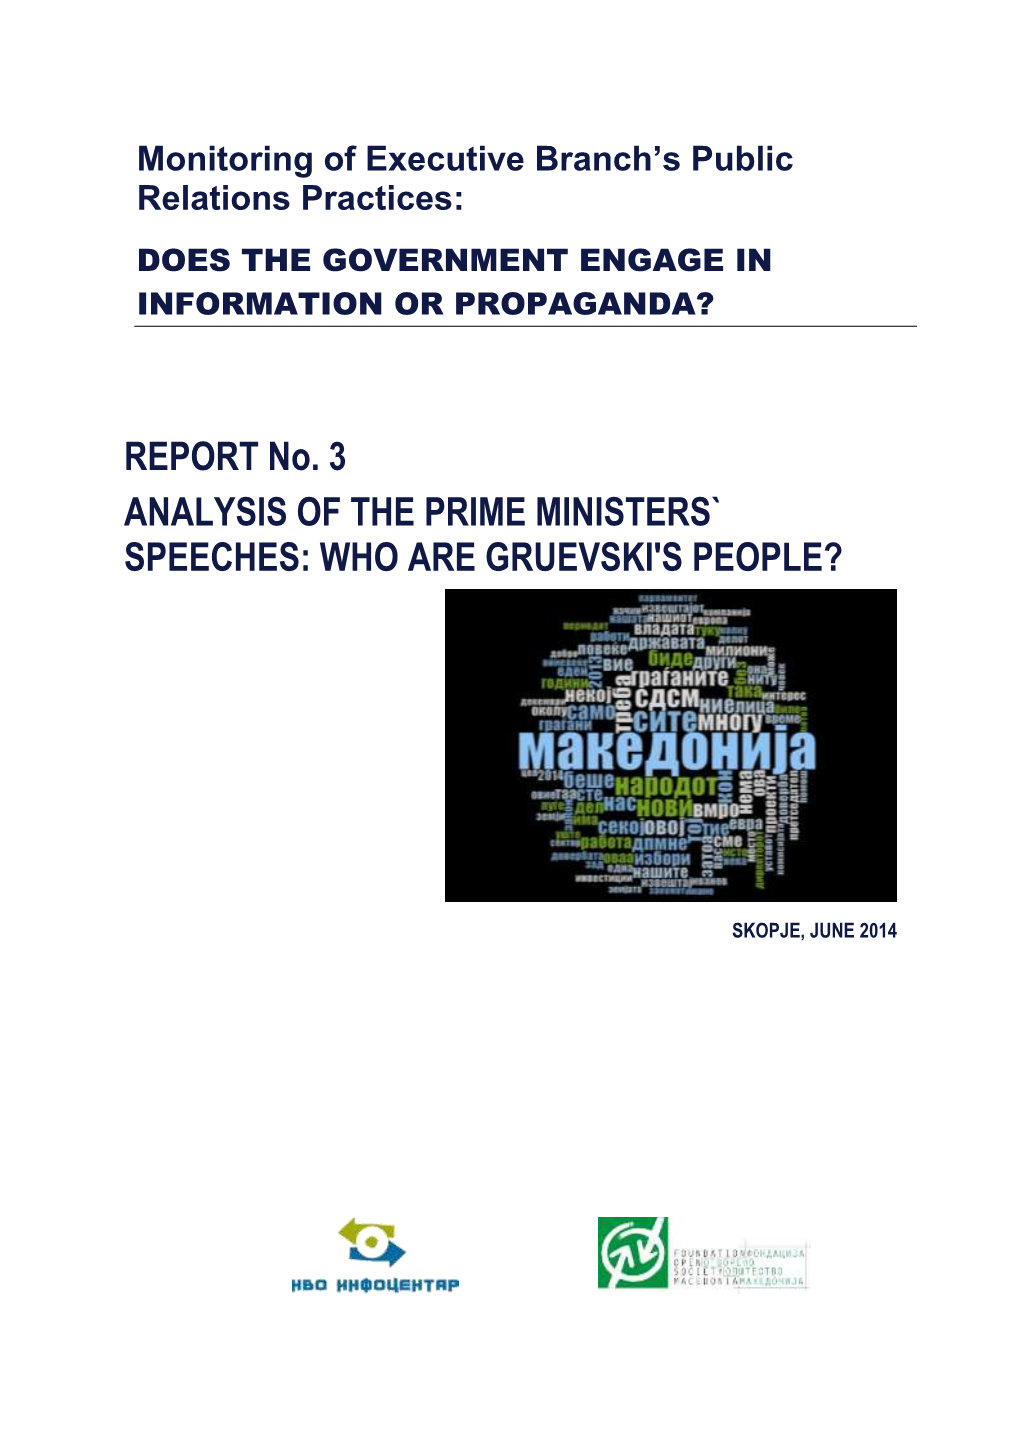 REPORT No. 3 ANALYSIS of the PRIME MINISTERS` SPEECHES: WHO ARE GRUEVSKI's PEOPLE?